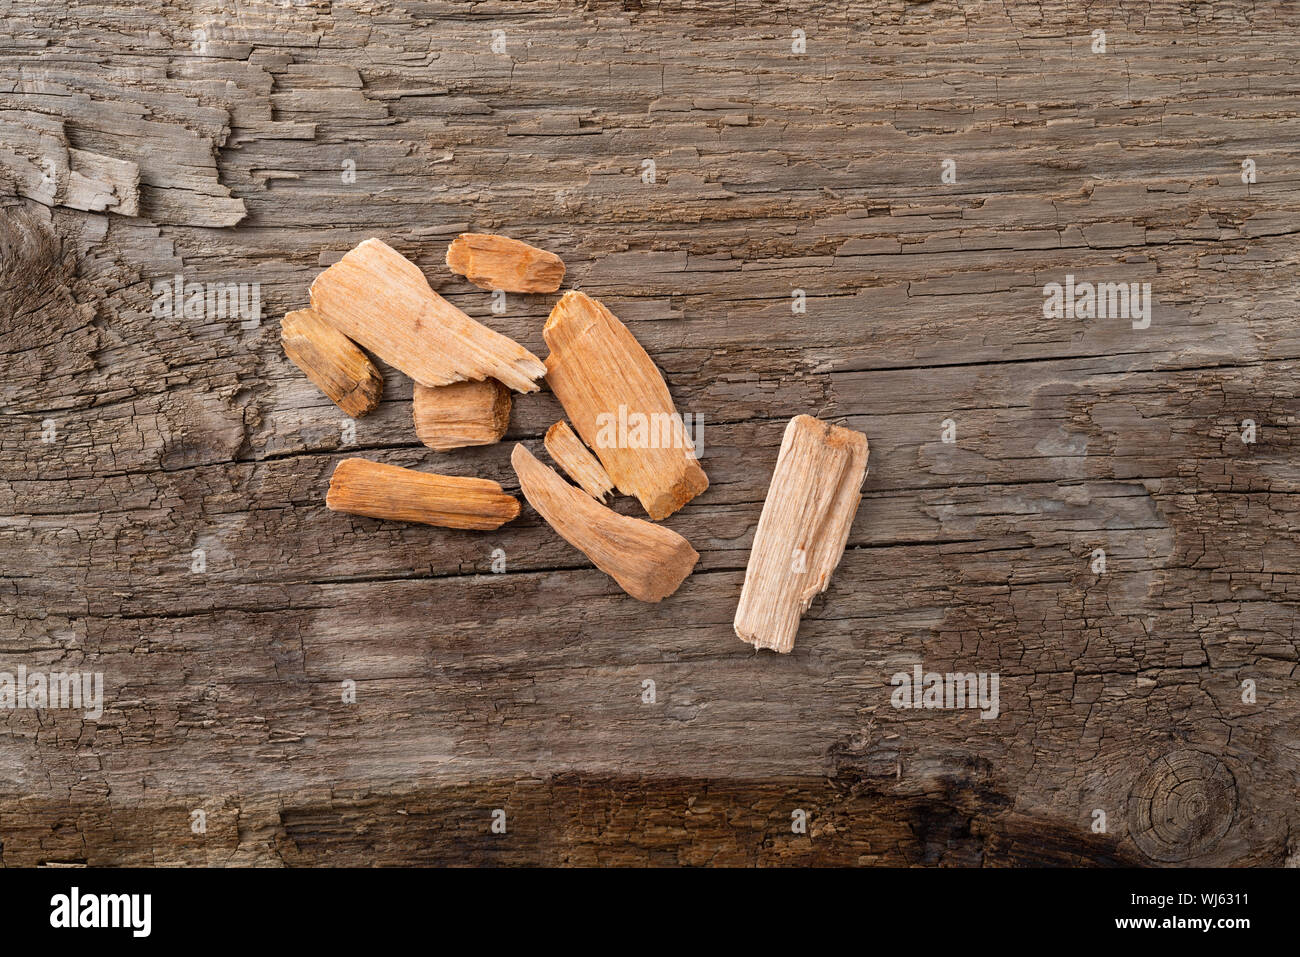 Small group of alder wood smoking chips for barbecuing on a weathered background. Stock Photo